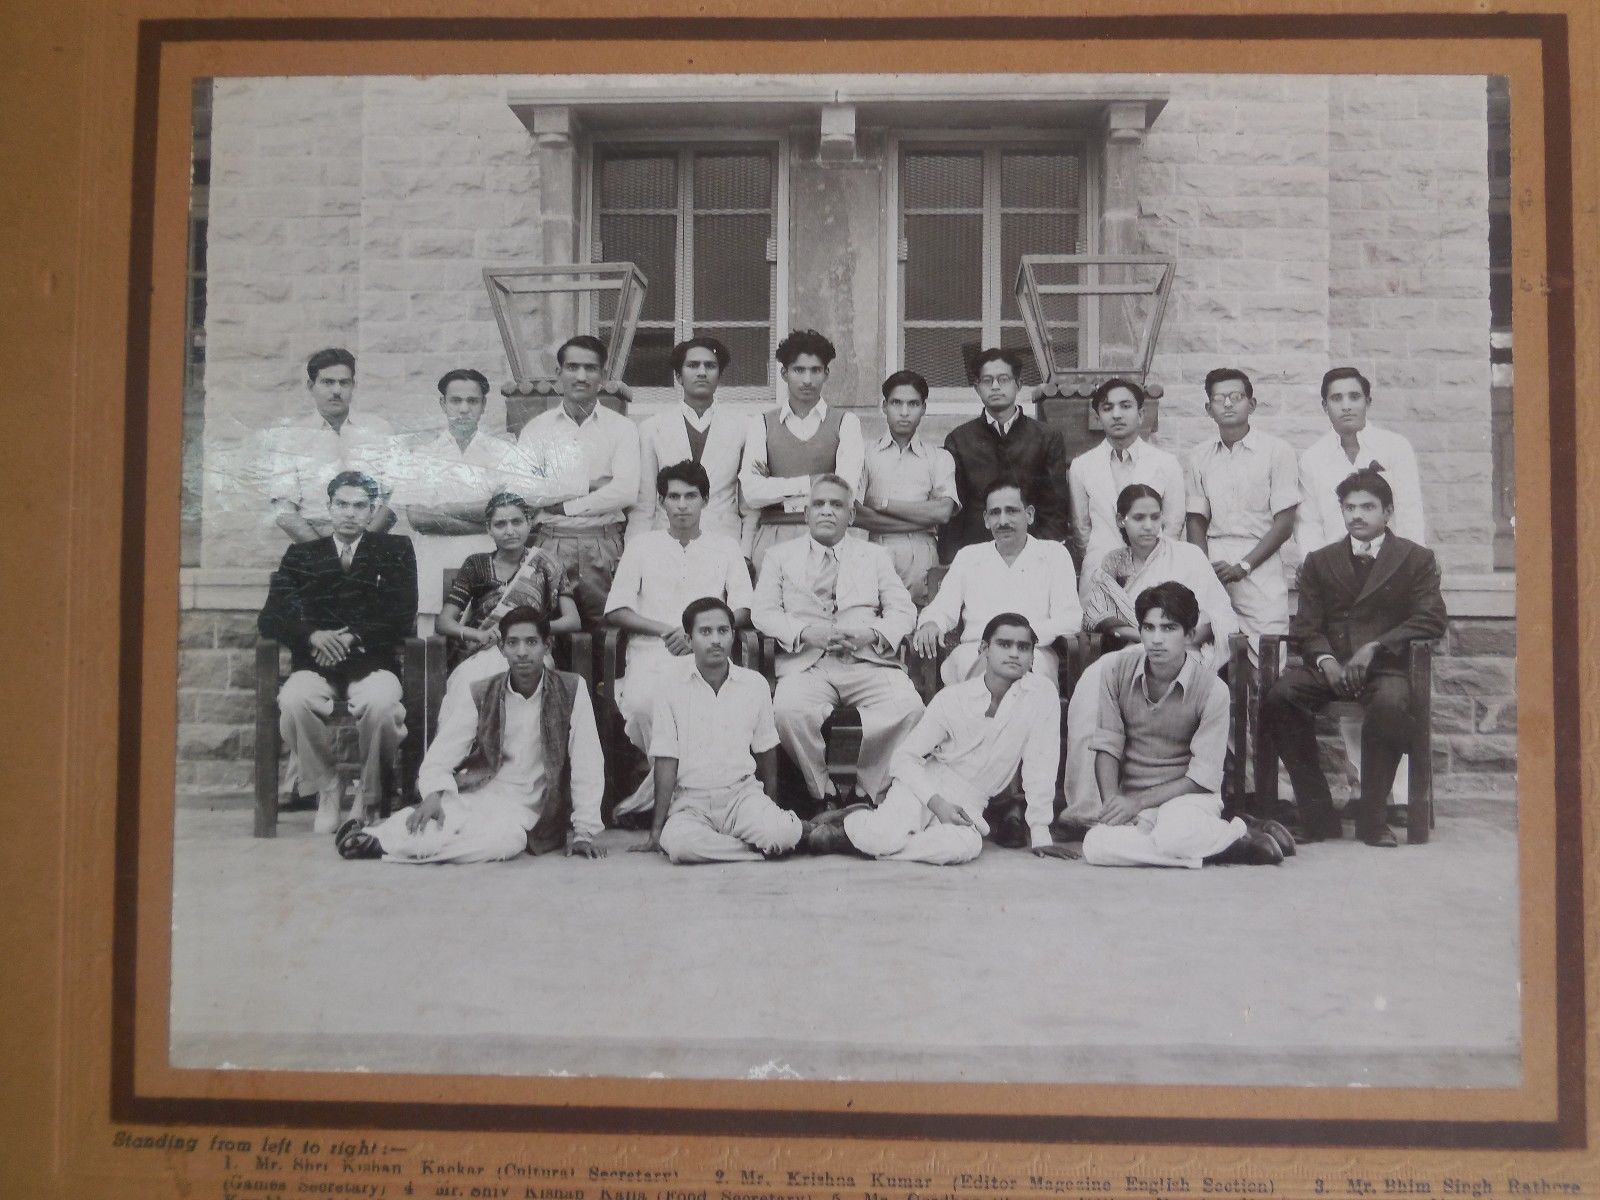 Jaswant College Students' Union, On the Occasion of Inaguration of Union 1951